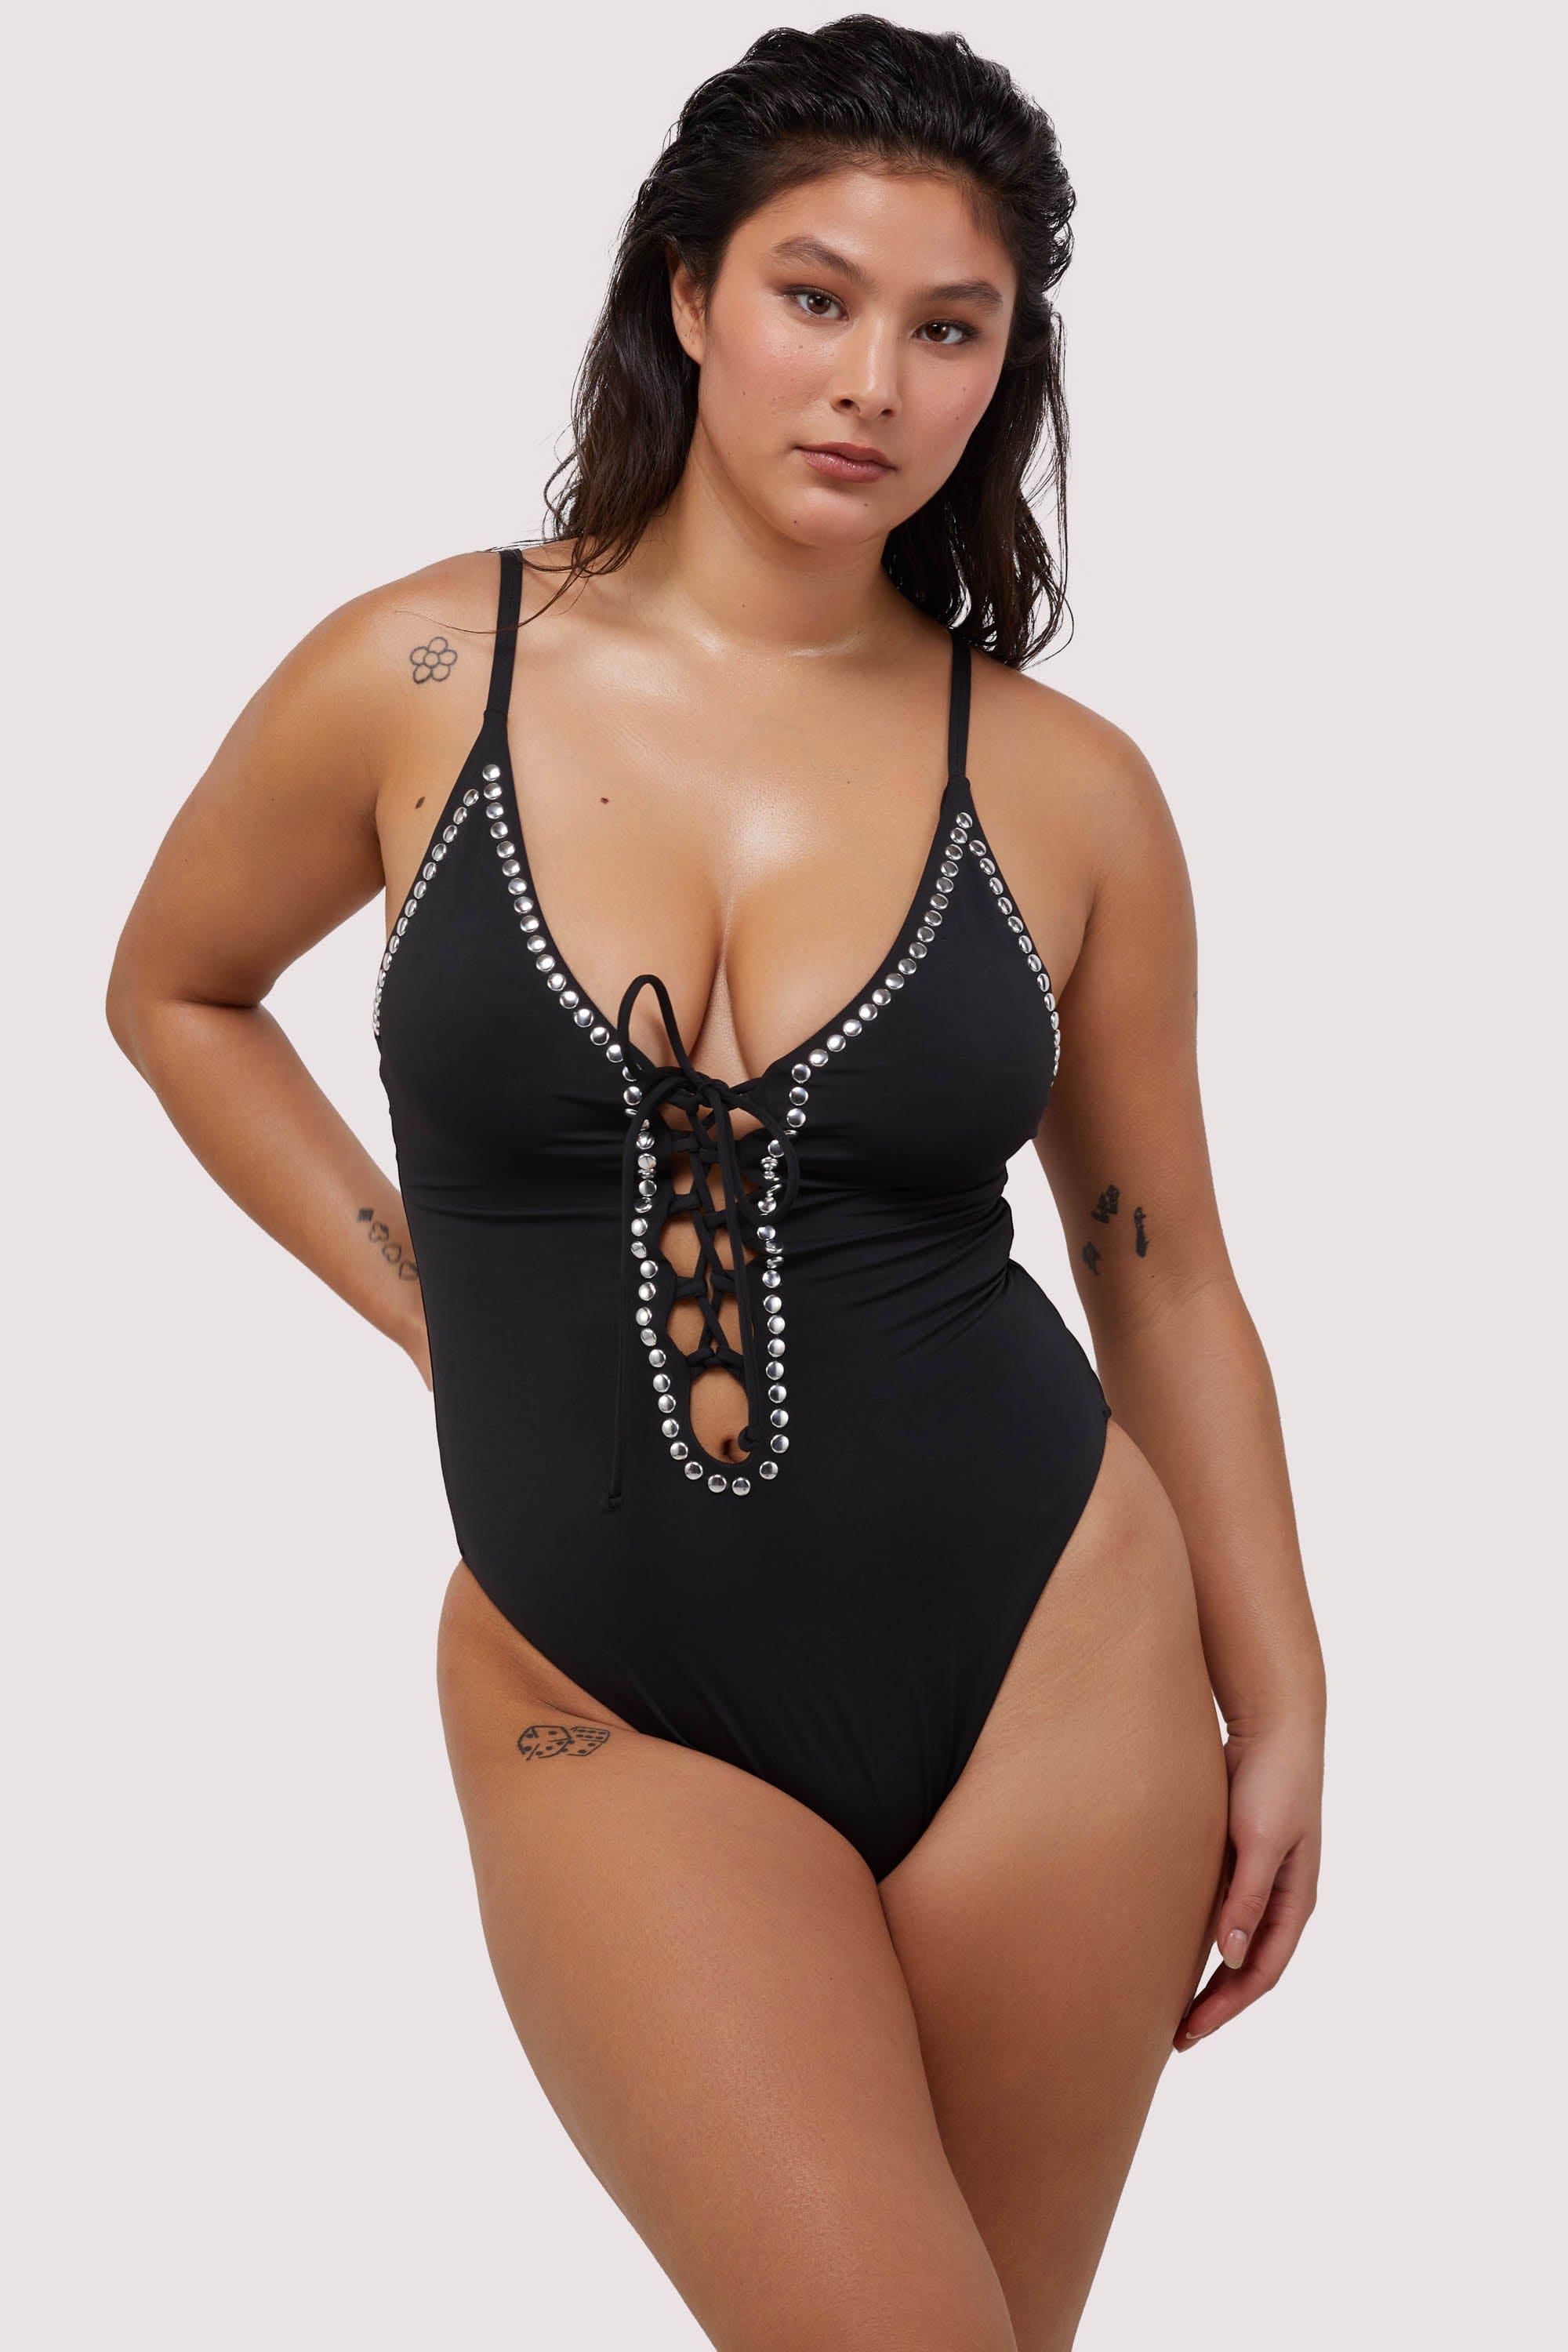 Gabrielle Fuller Bust Black Eco Studded Lace-Up Swimsuit 12D/DD